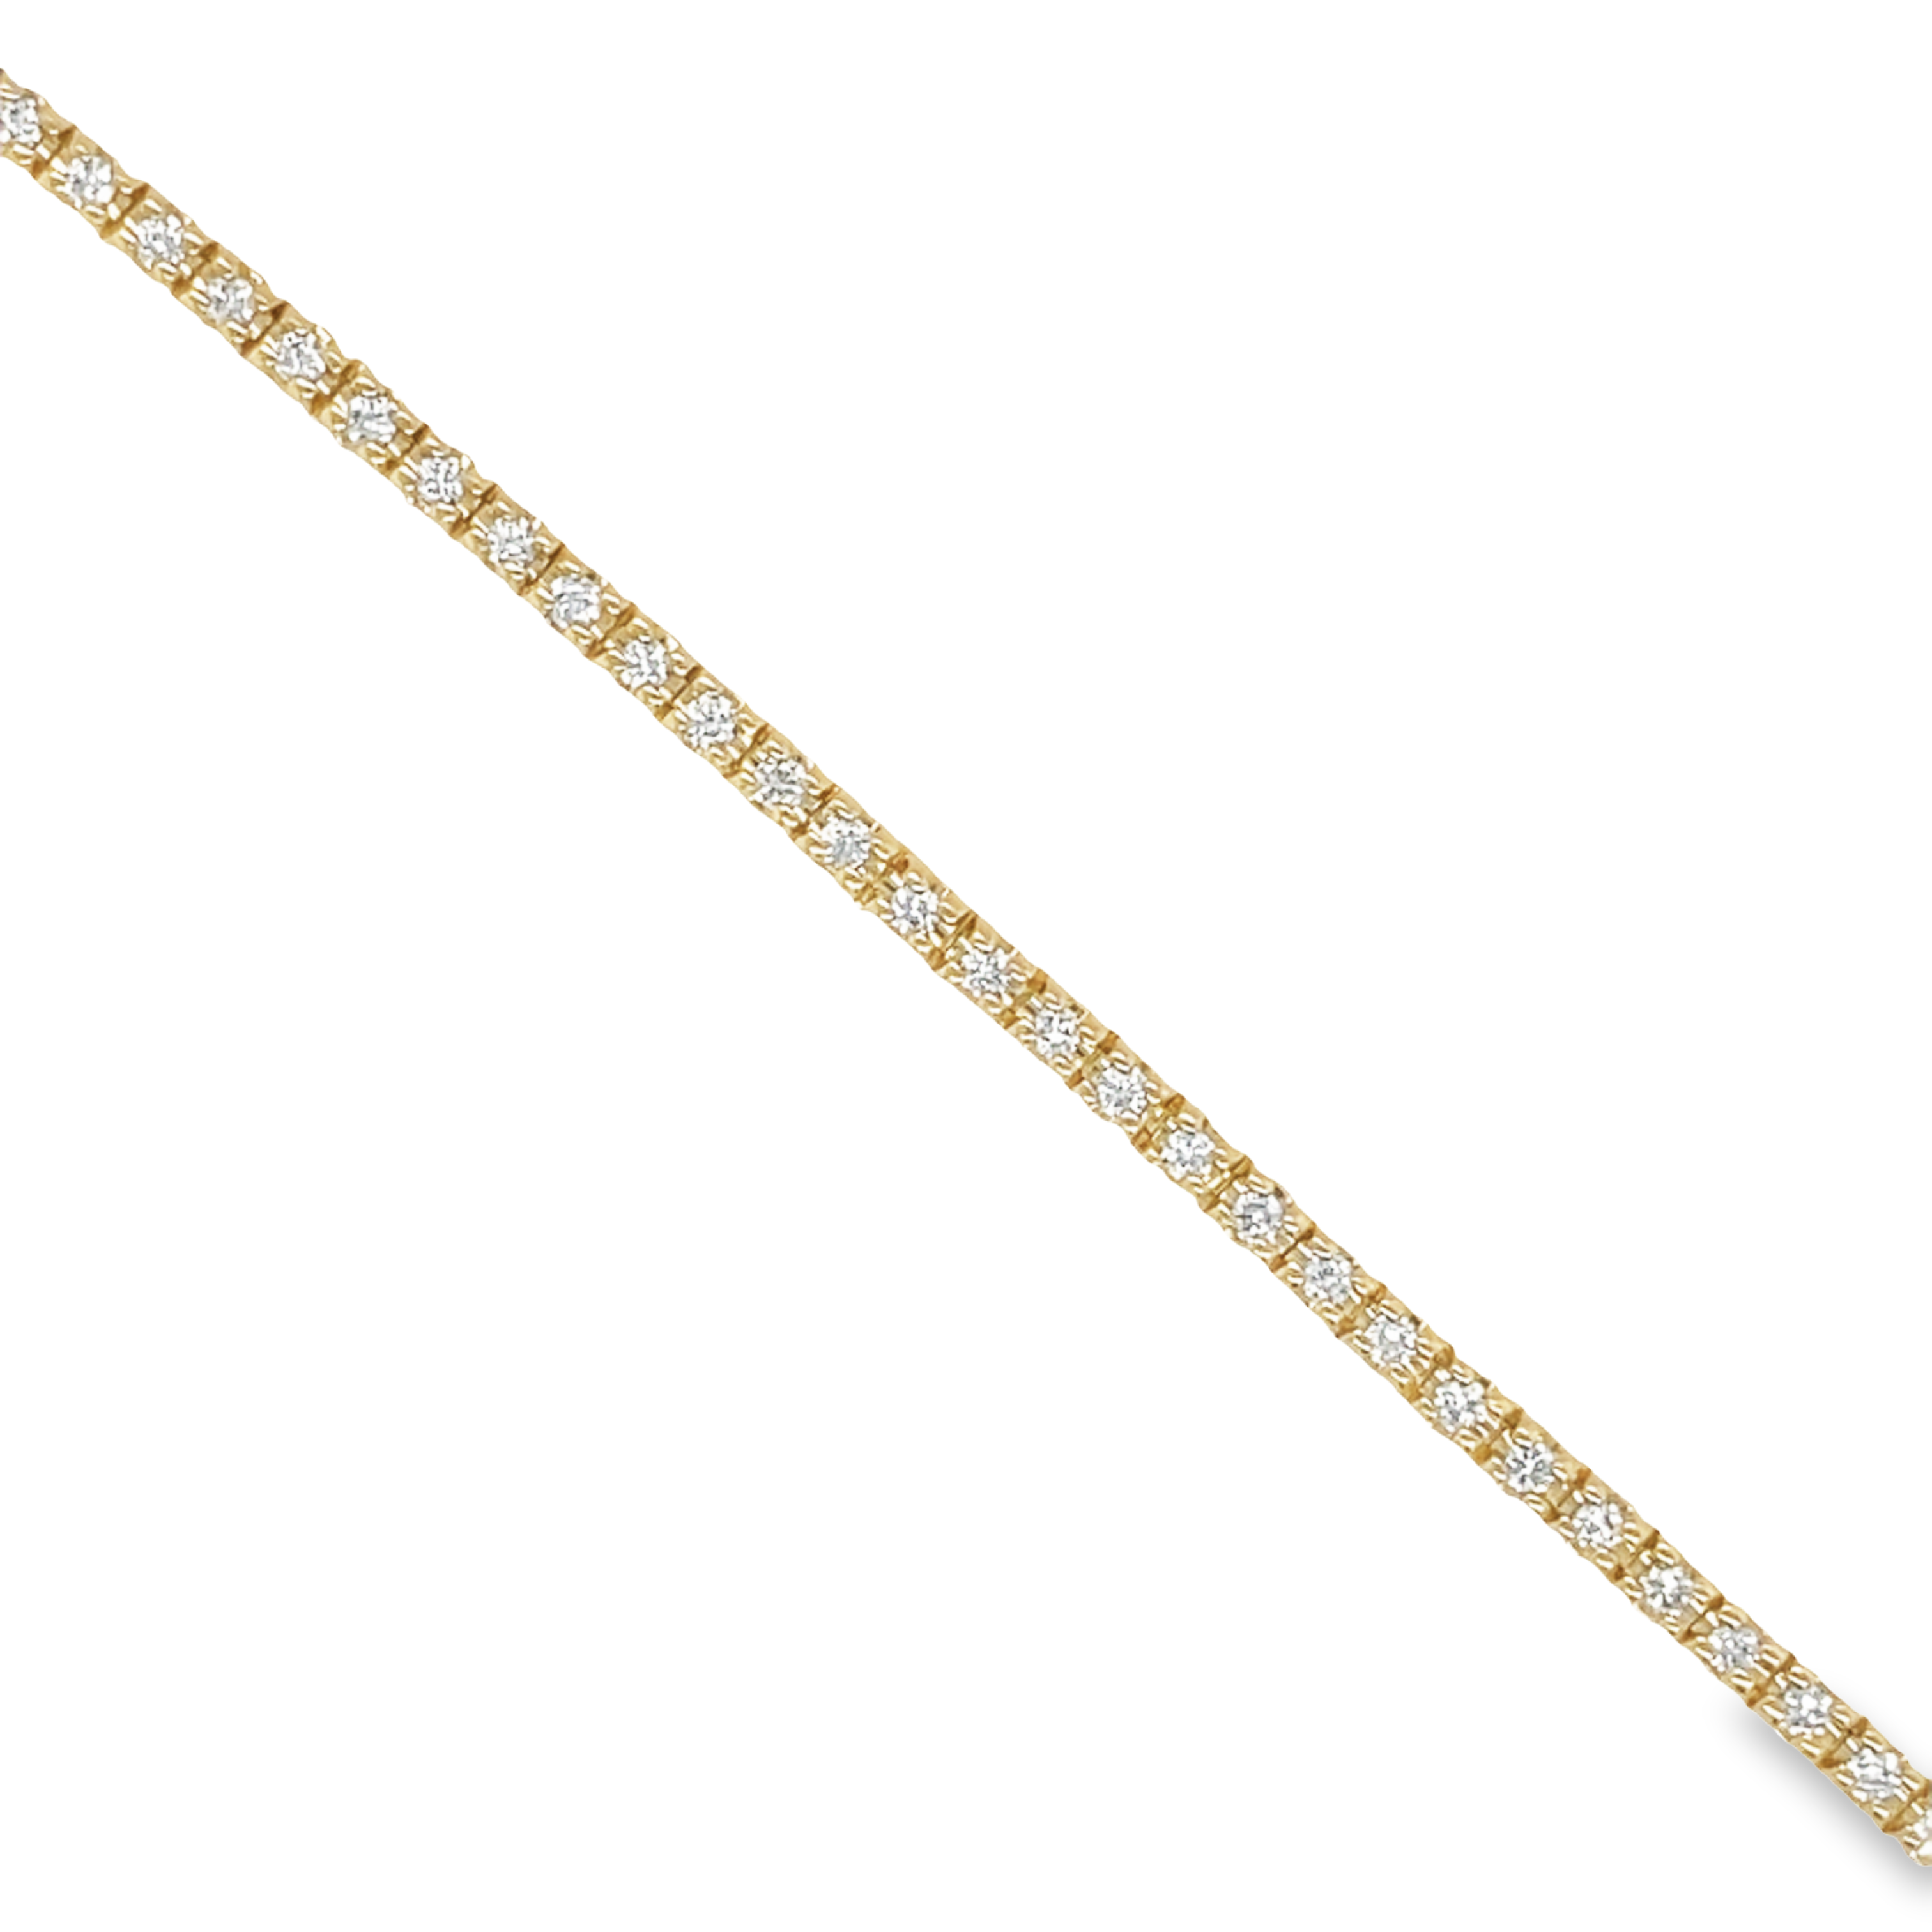 This Diamond Line Tennis Bracelet is set in 14k yellow gold and features a sparkling 0.88 ctw of diamonds with good color and clarity. Its sophisticated design makes it easy to stack with other pieces and wear to any occasion.